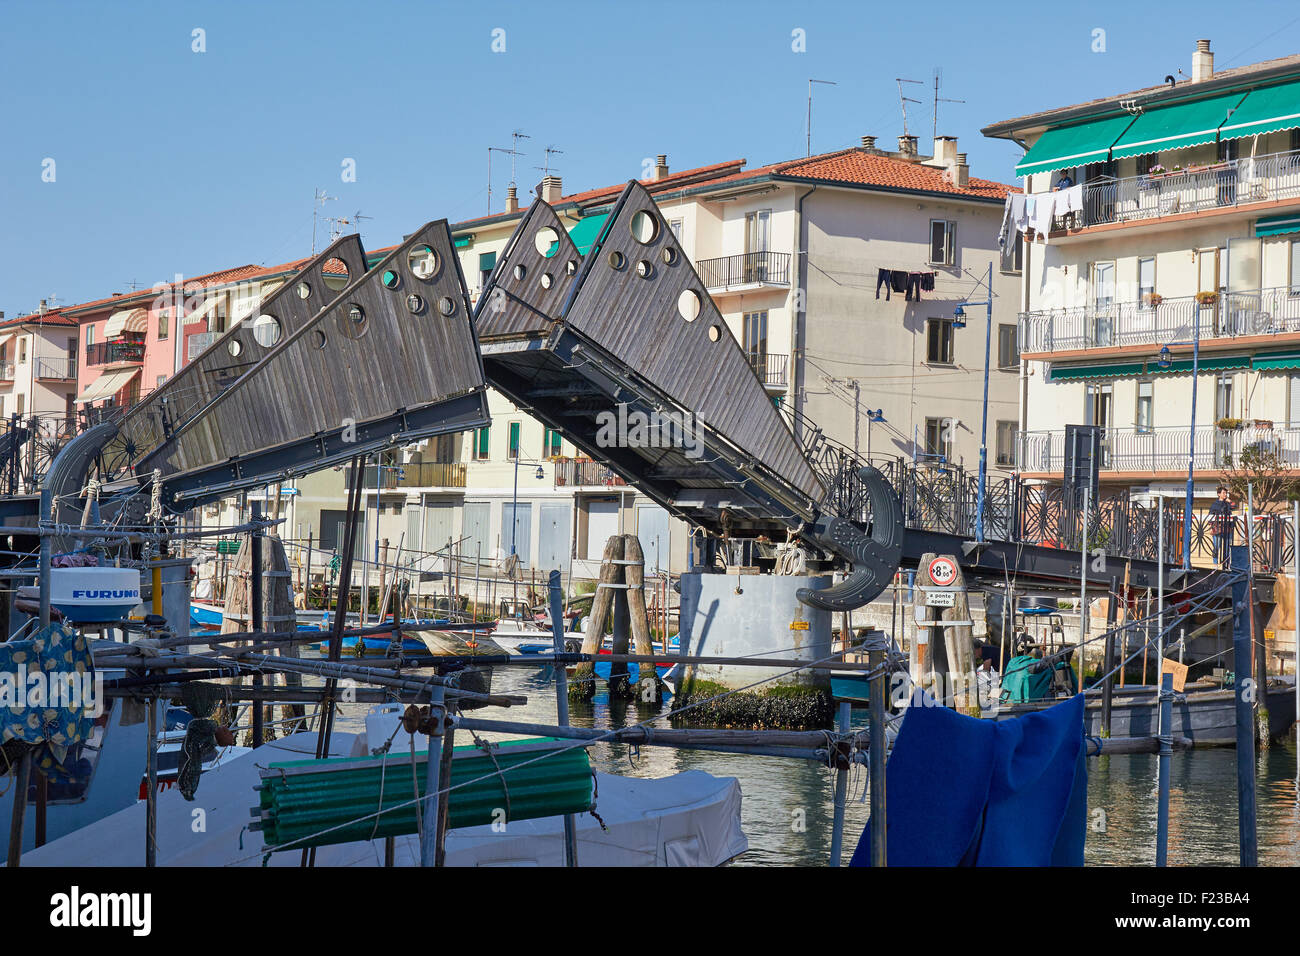 A wooden footbridge closing after boats have passed through Chioggia Venetian Lagoon Veneto Italy Europe Stock Photo